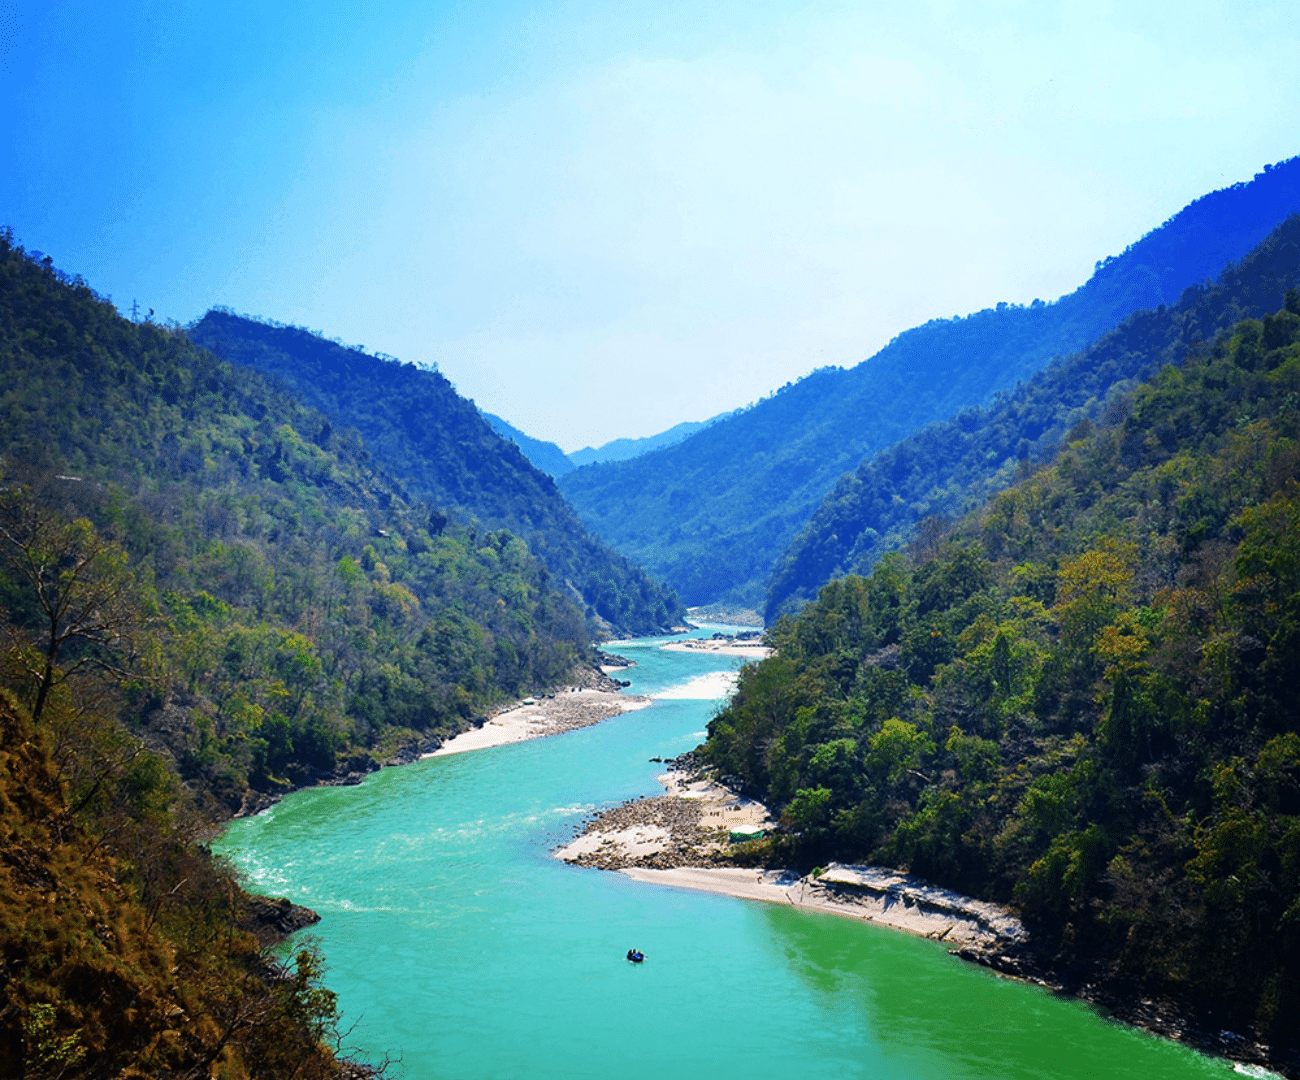 Rishikesh included in our uttarakhand tour package